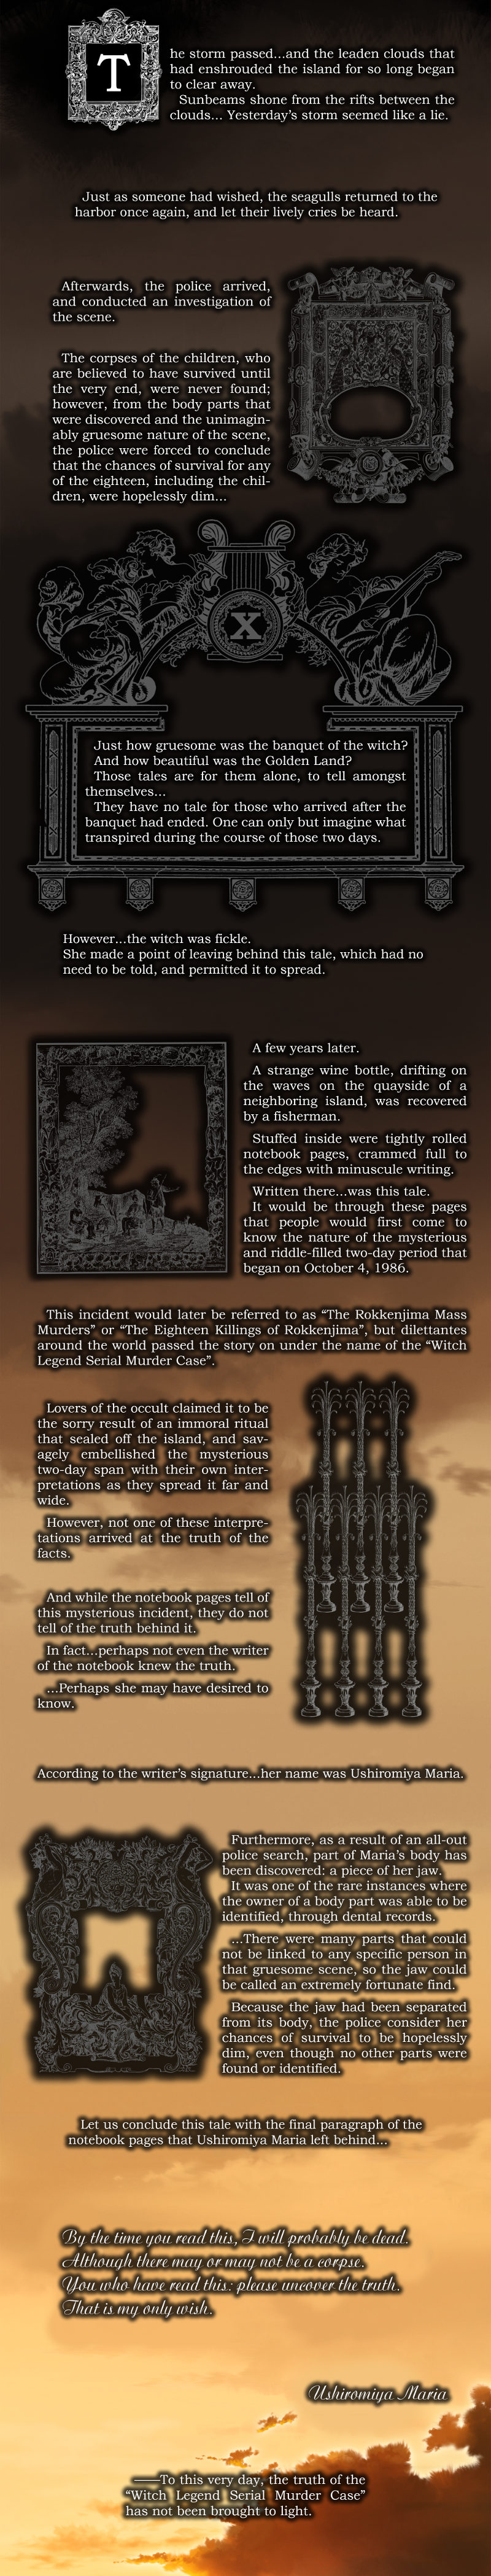 The first part of the game’s epilogue. Text is printed over a cloudy sunset, overlaid with medieval-style illustrations. See below for text.